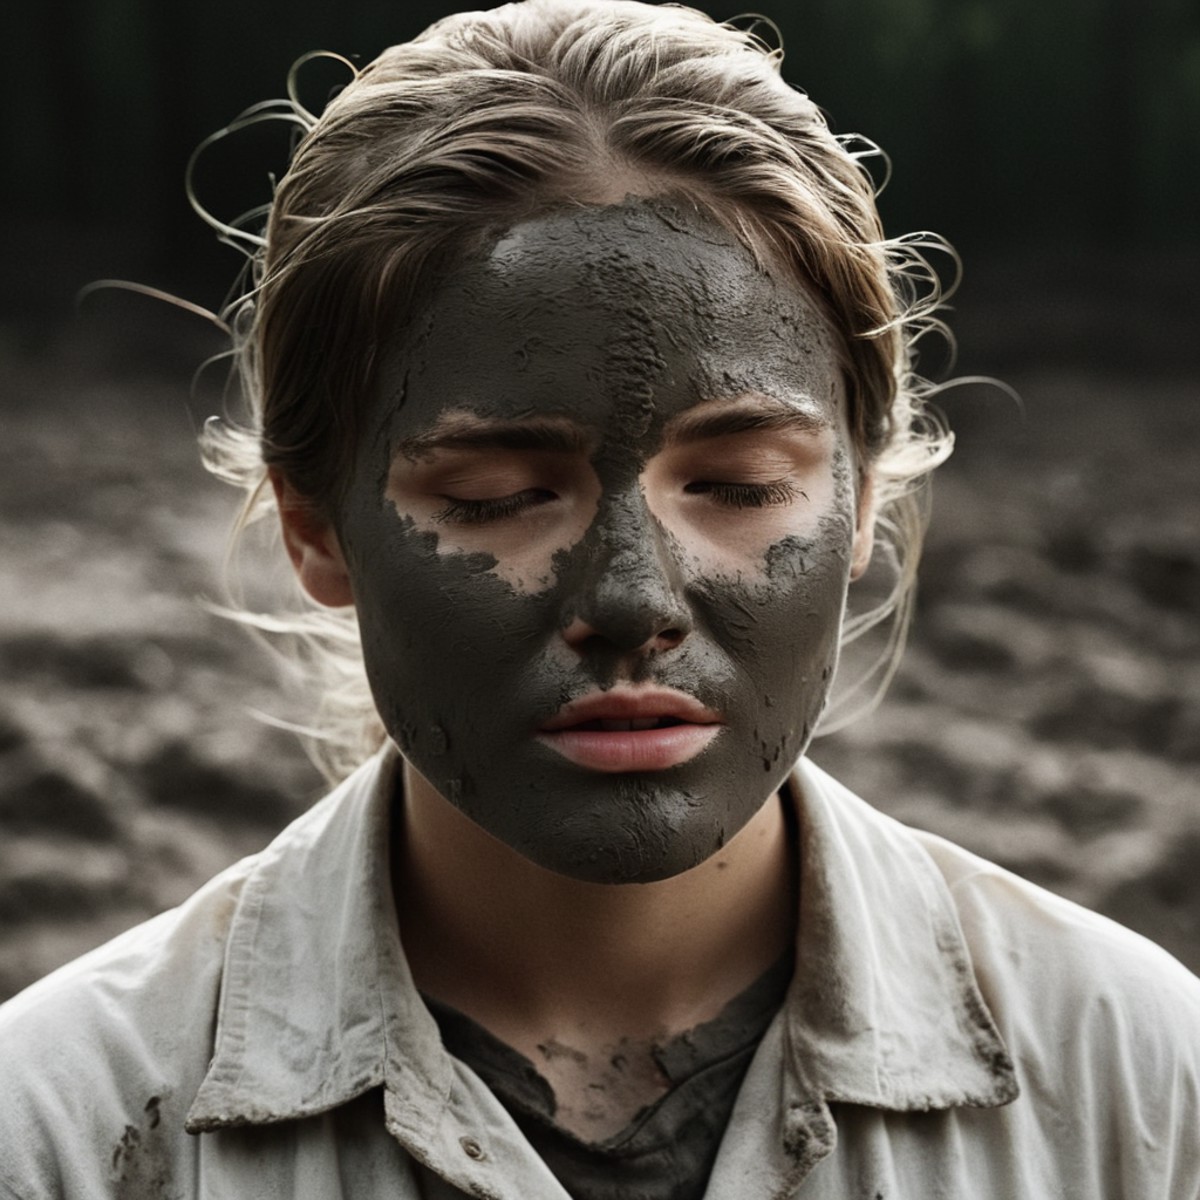 cinematic film still of  <lora:High-key lighting Style:1>
bright light, bright, a woman with mud on her face and a white s...